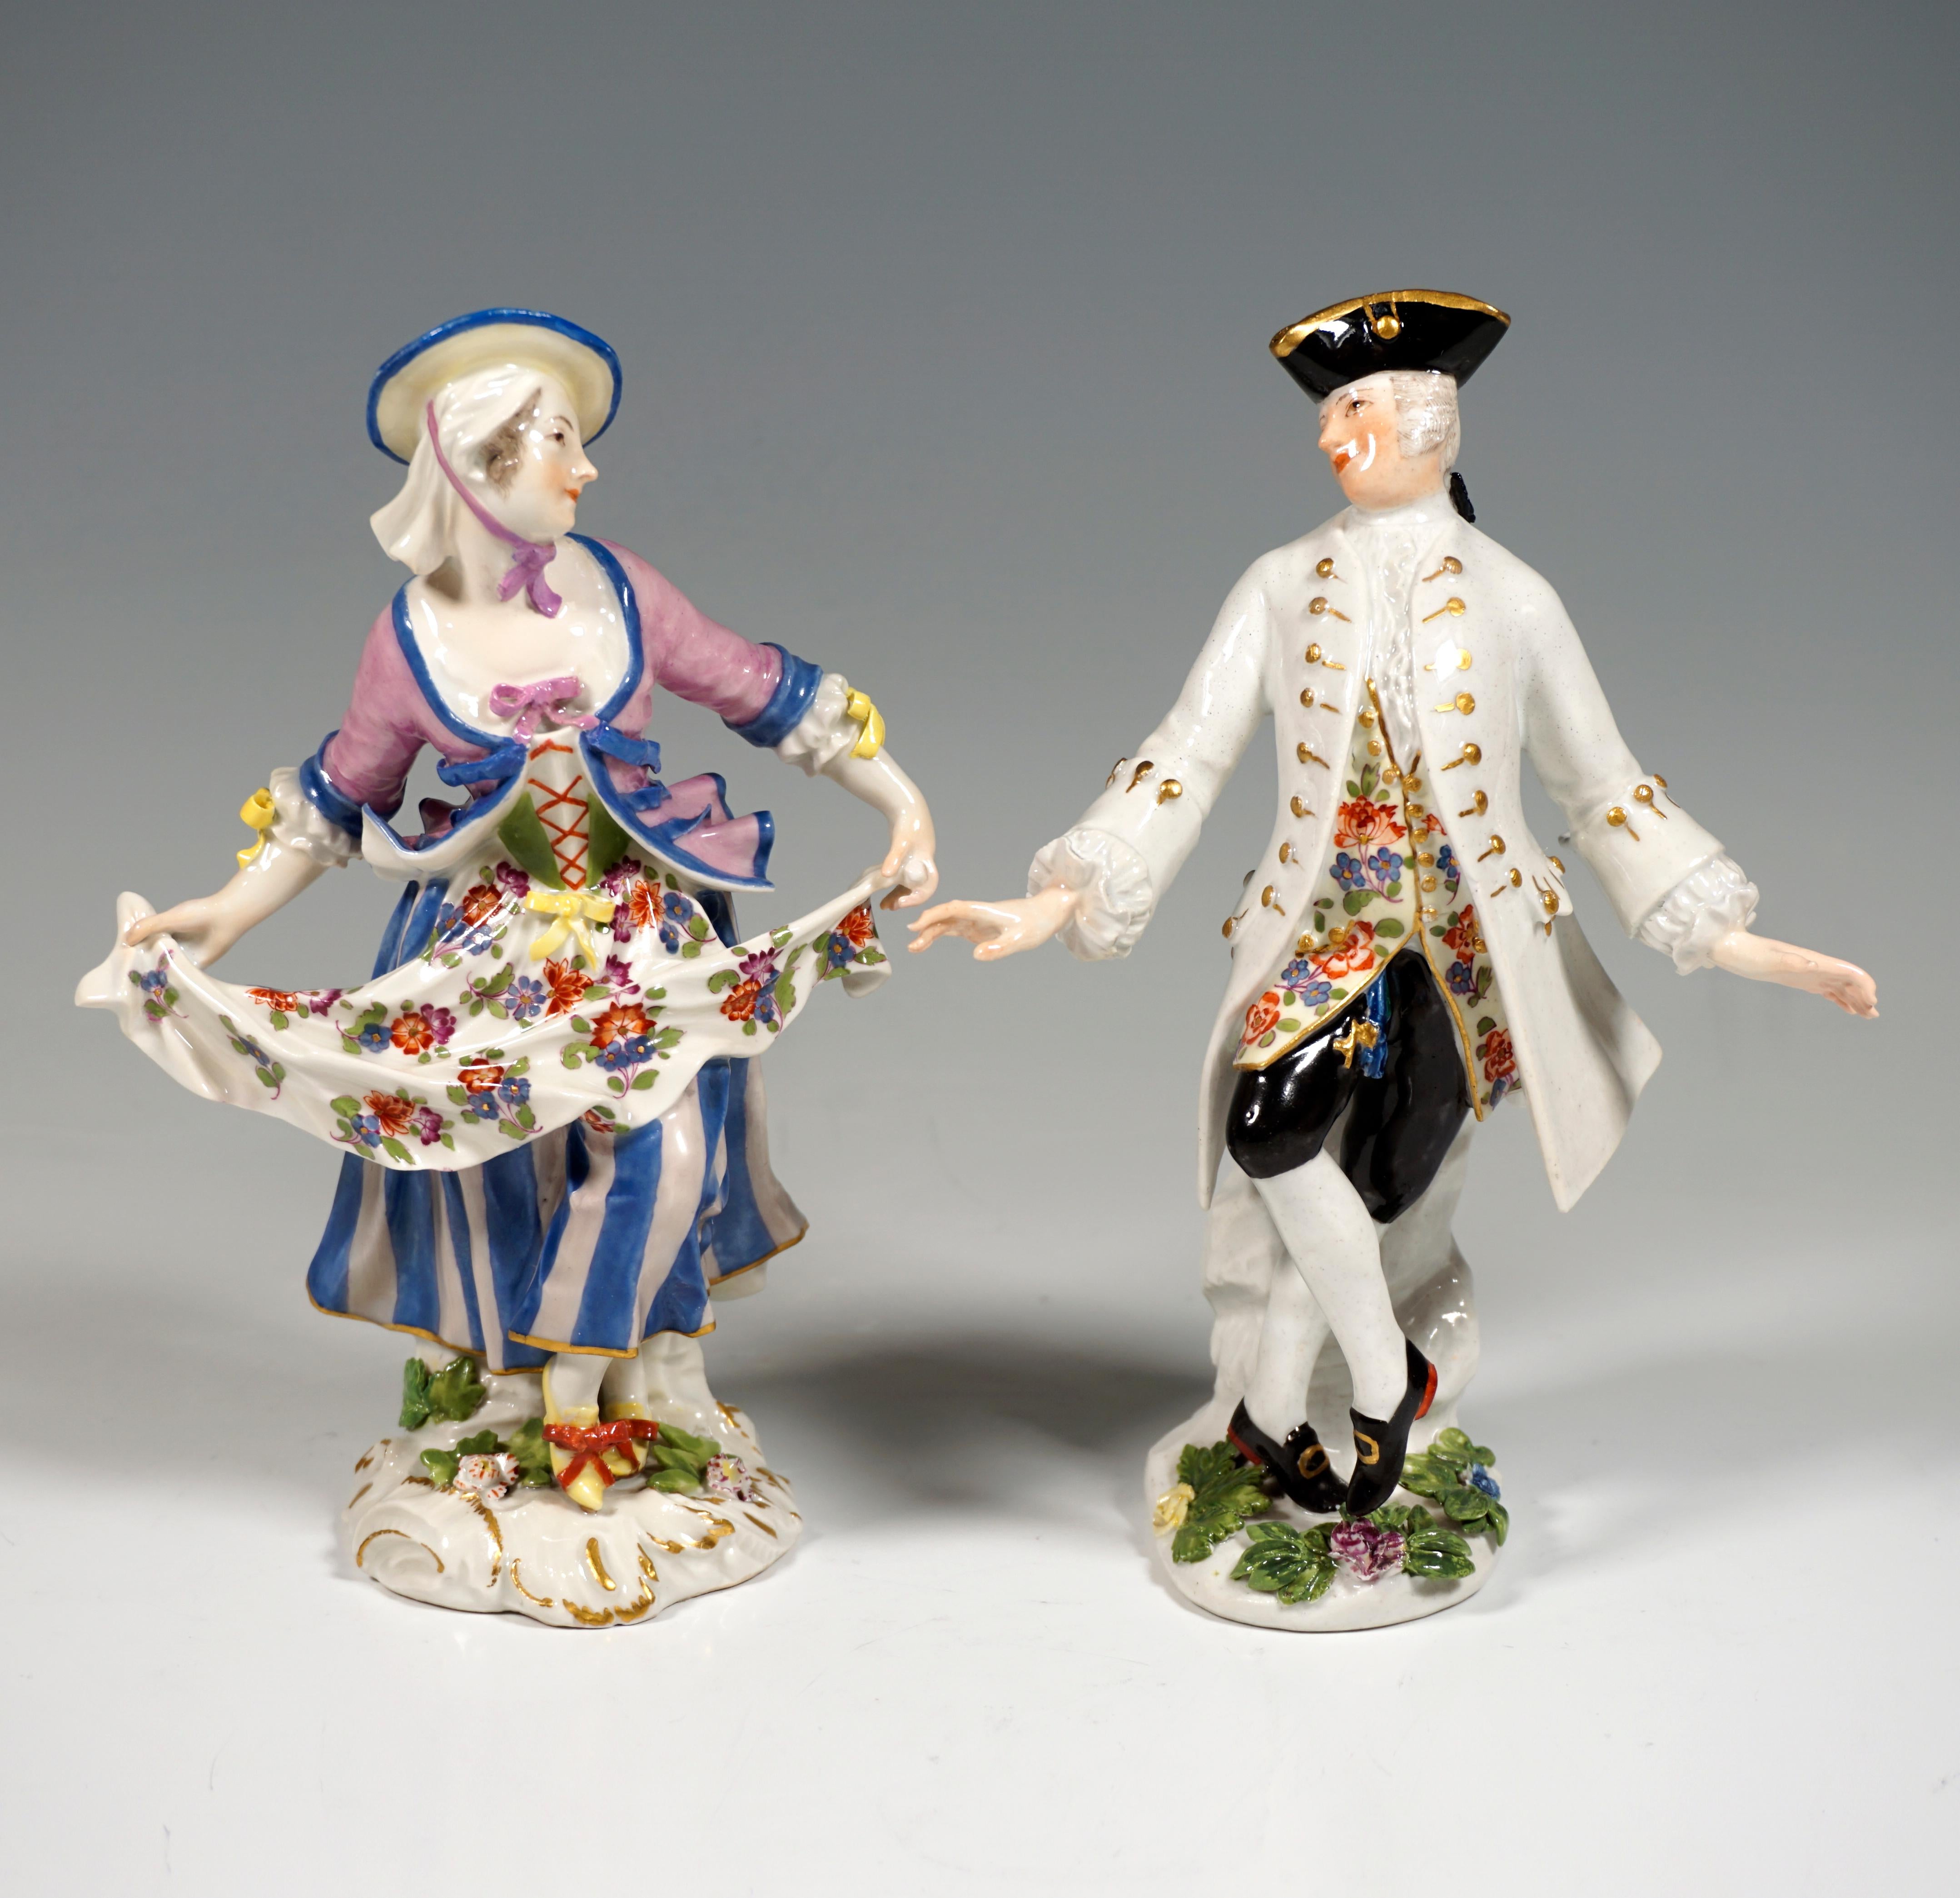 Galant dance couple consisting of two individual figures.
The female dancer wears rural Rococo clothing: a long, striped skirt with a bodice, a fitted vest over it, a flowered apron, which she holds up at the ends with her arms stretched out to the